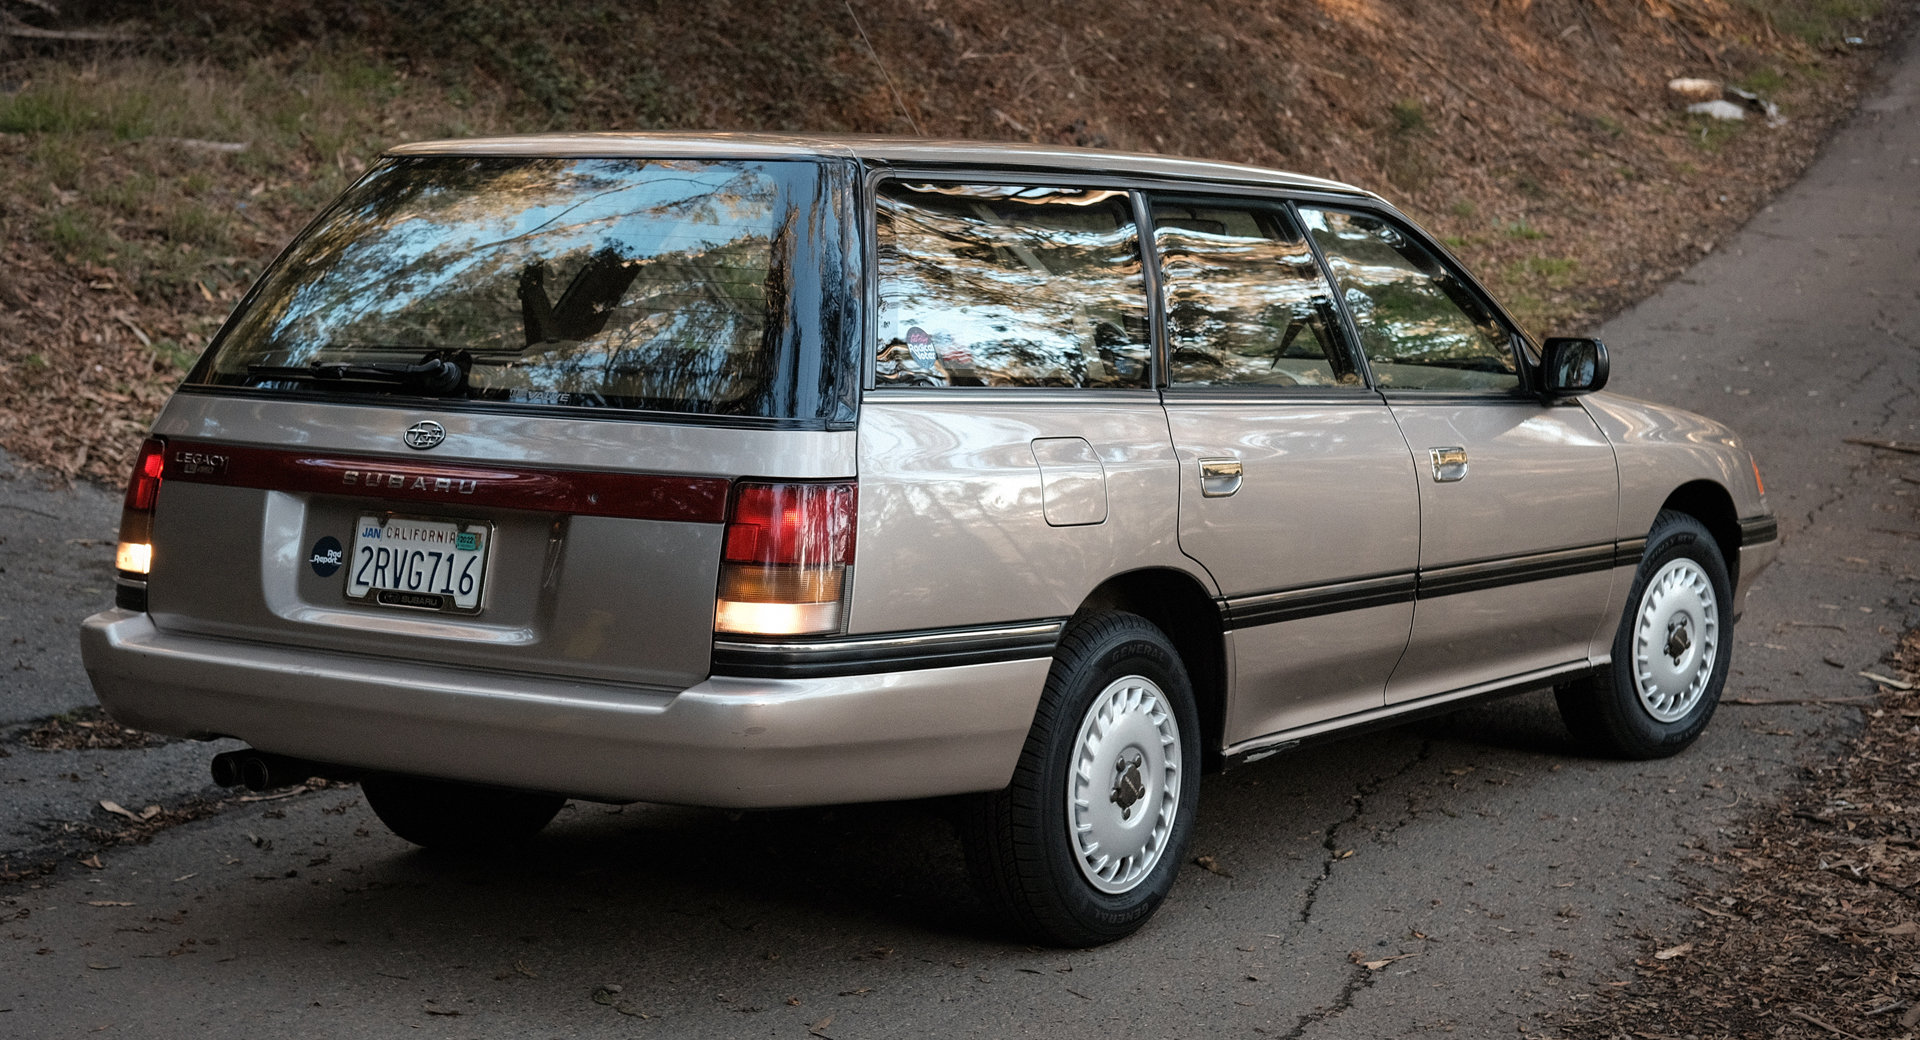 Subaru Of America Brought This 216k Mile 1990 Legacy For Its Private